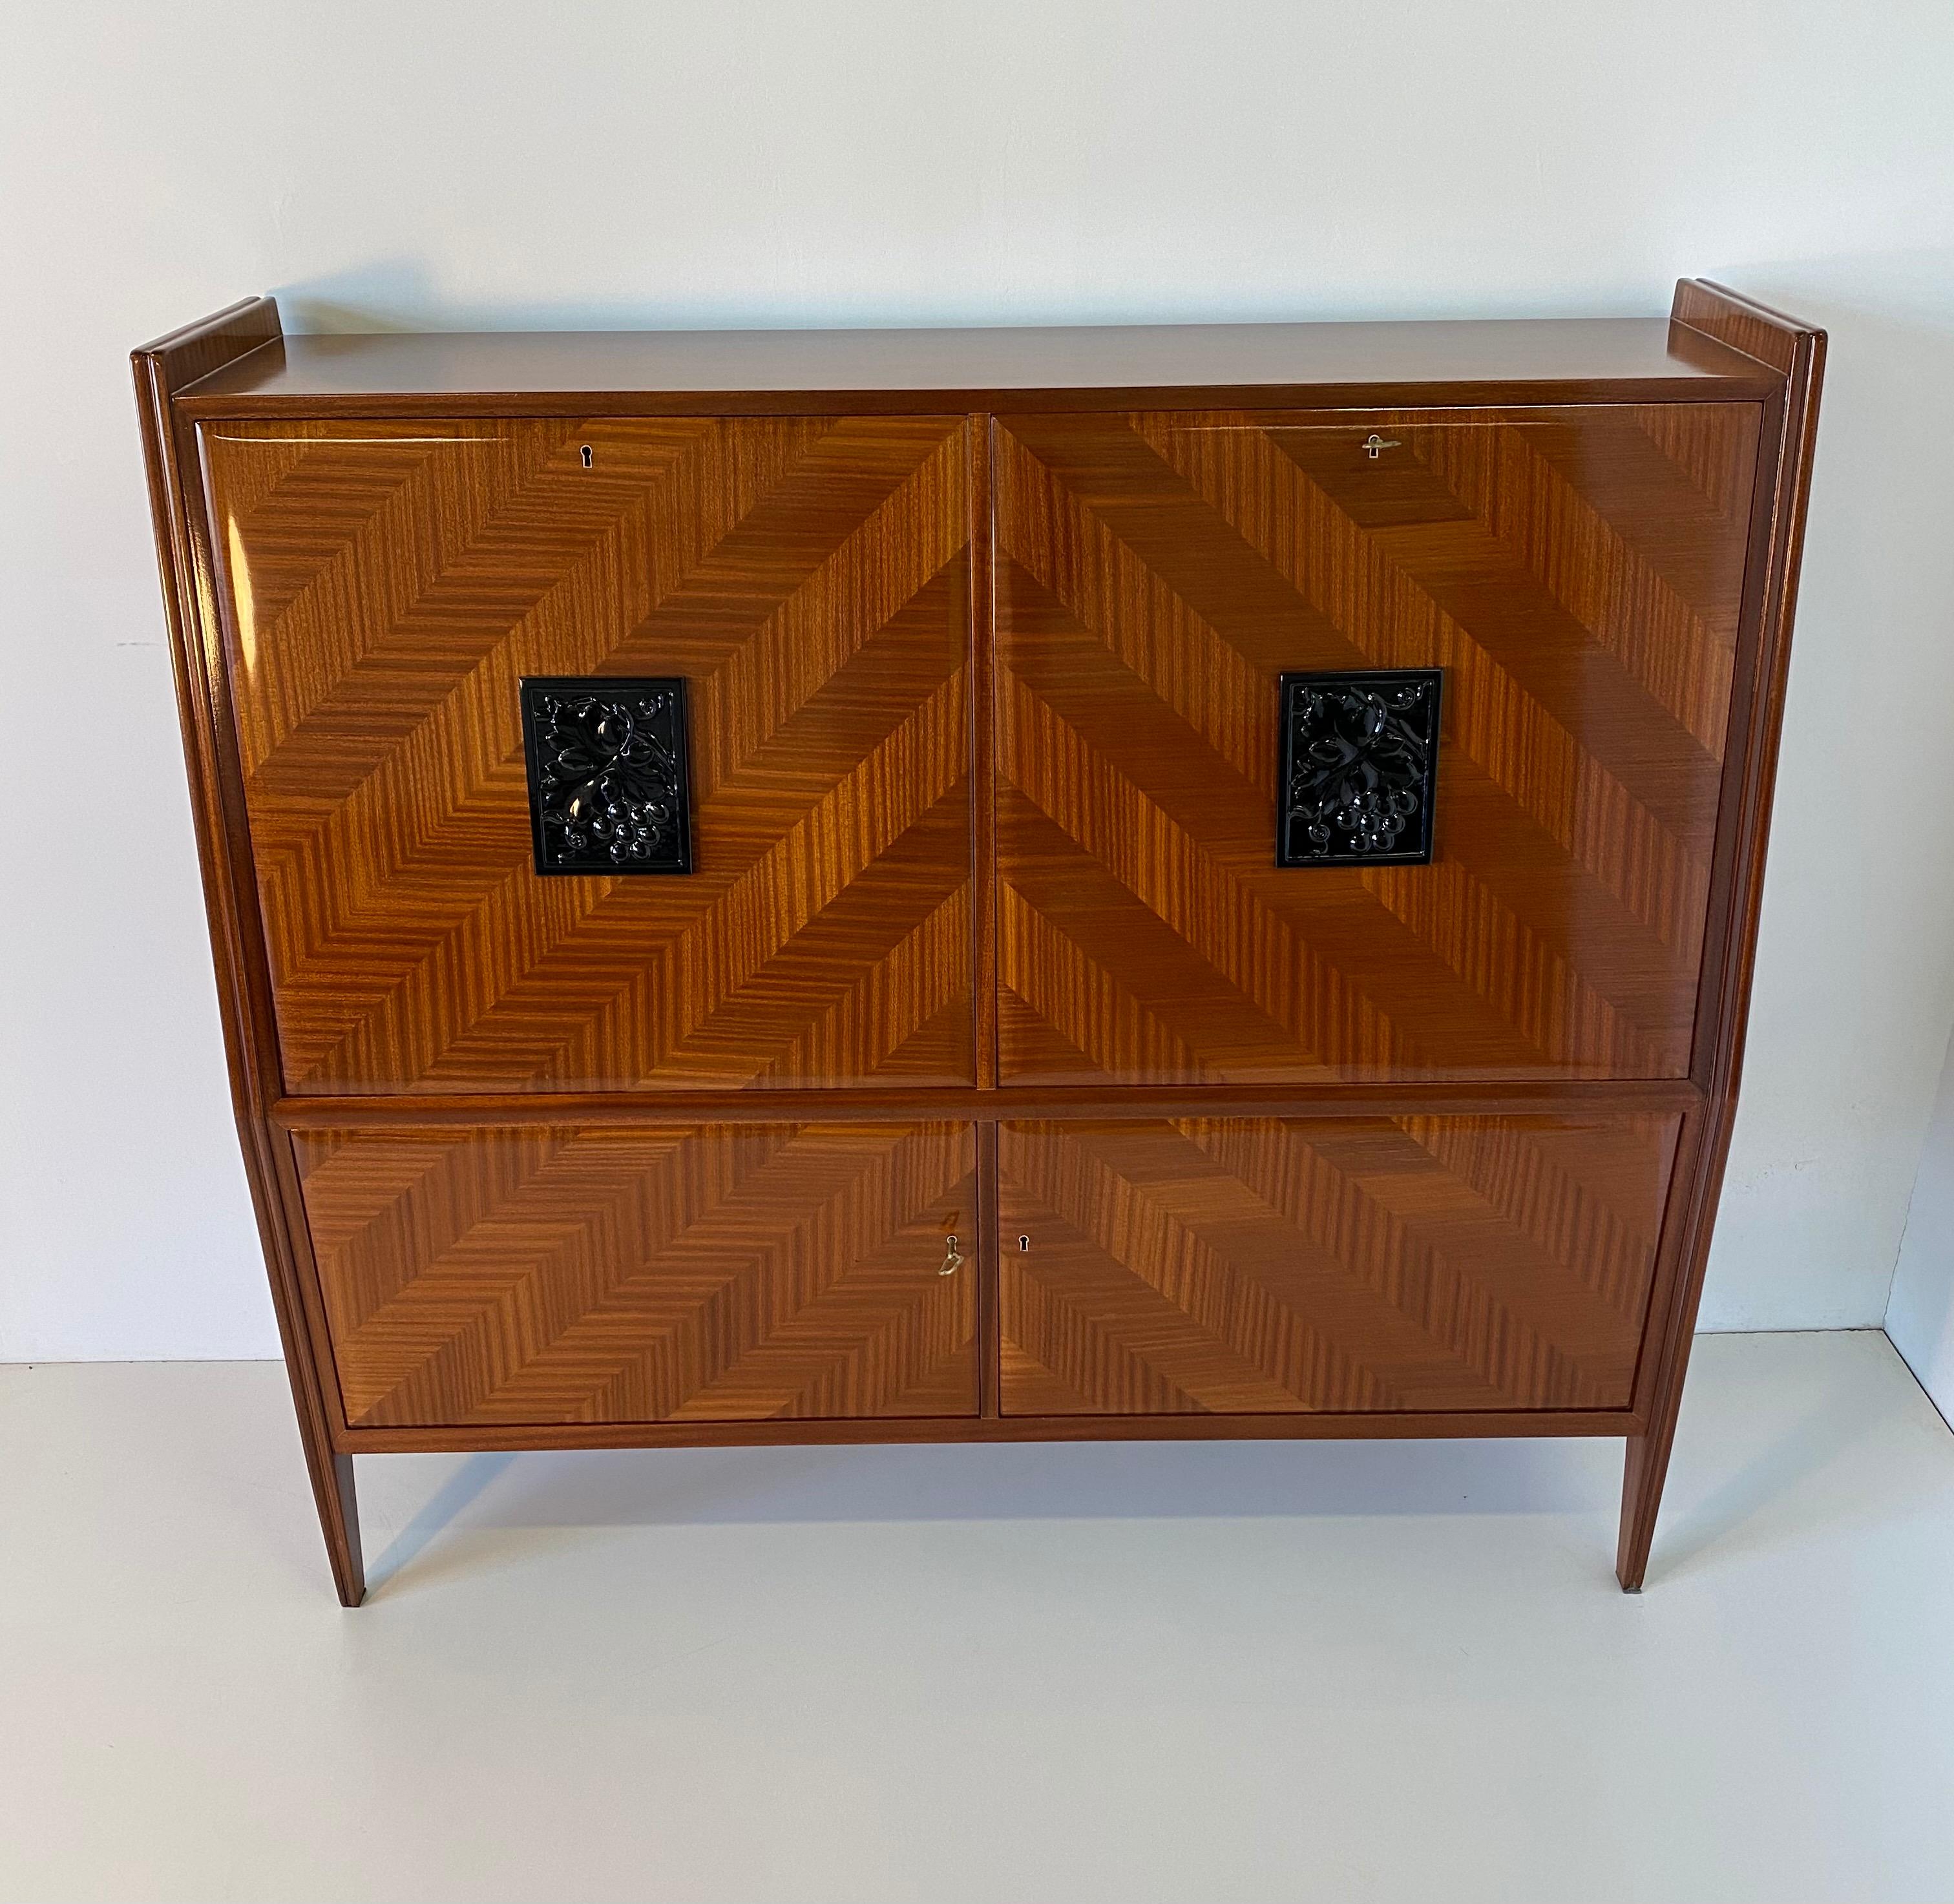 Precious cabinet secretaire produced in Italy in the 1950s,
The whole cabinet is veneered in mahogany with a fine solid wood carving in the center of the two doors representing two bunches of grapes.
The interiors are in maple.
Completely restored